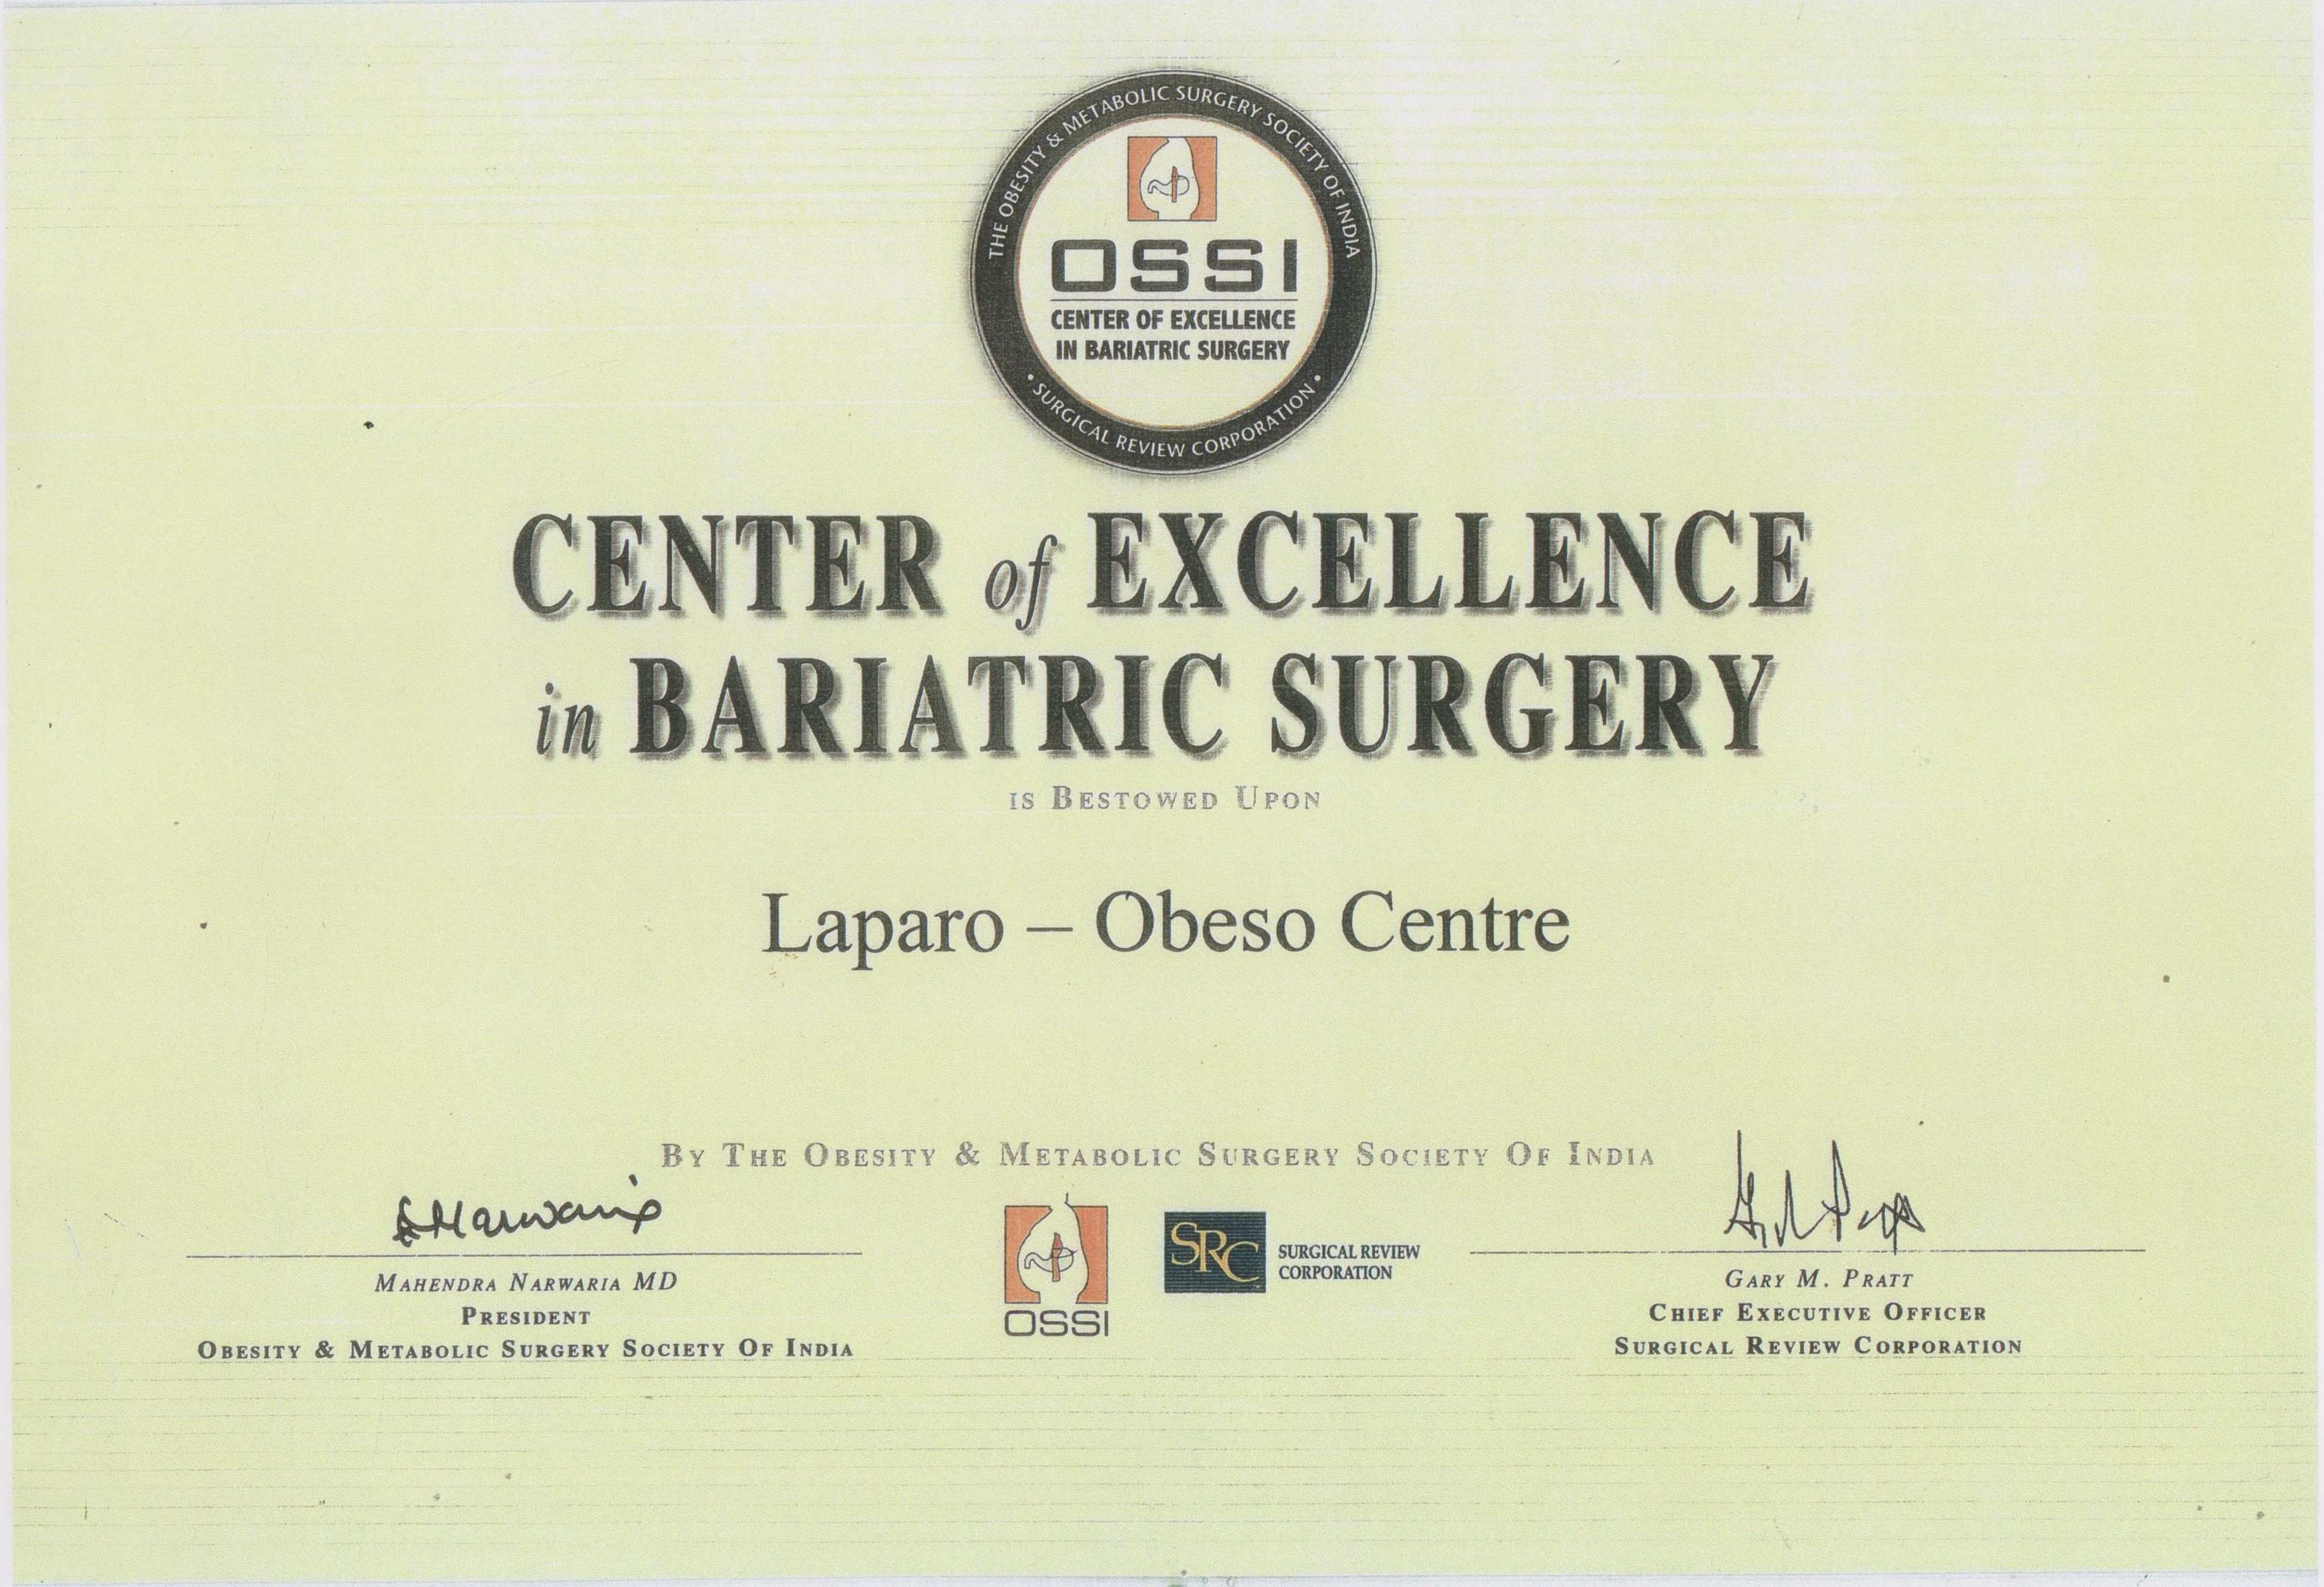 Laparo Obeso Centre was certified the Centre of Excellence for Metabolic and Bariatric Surgery by the Obesity Surgery Society of India (OSSI).  